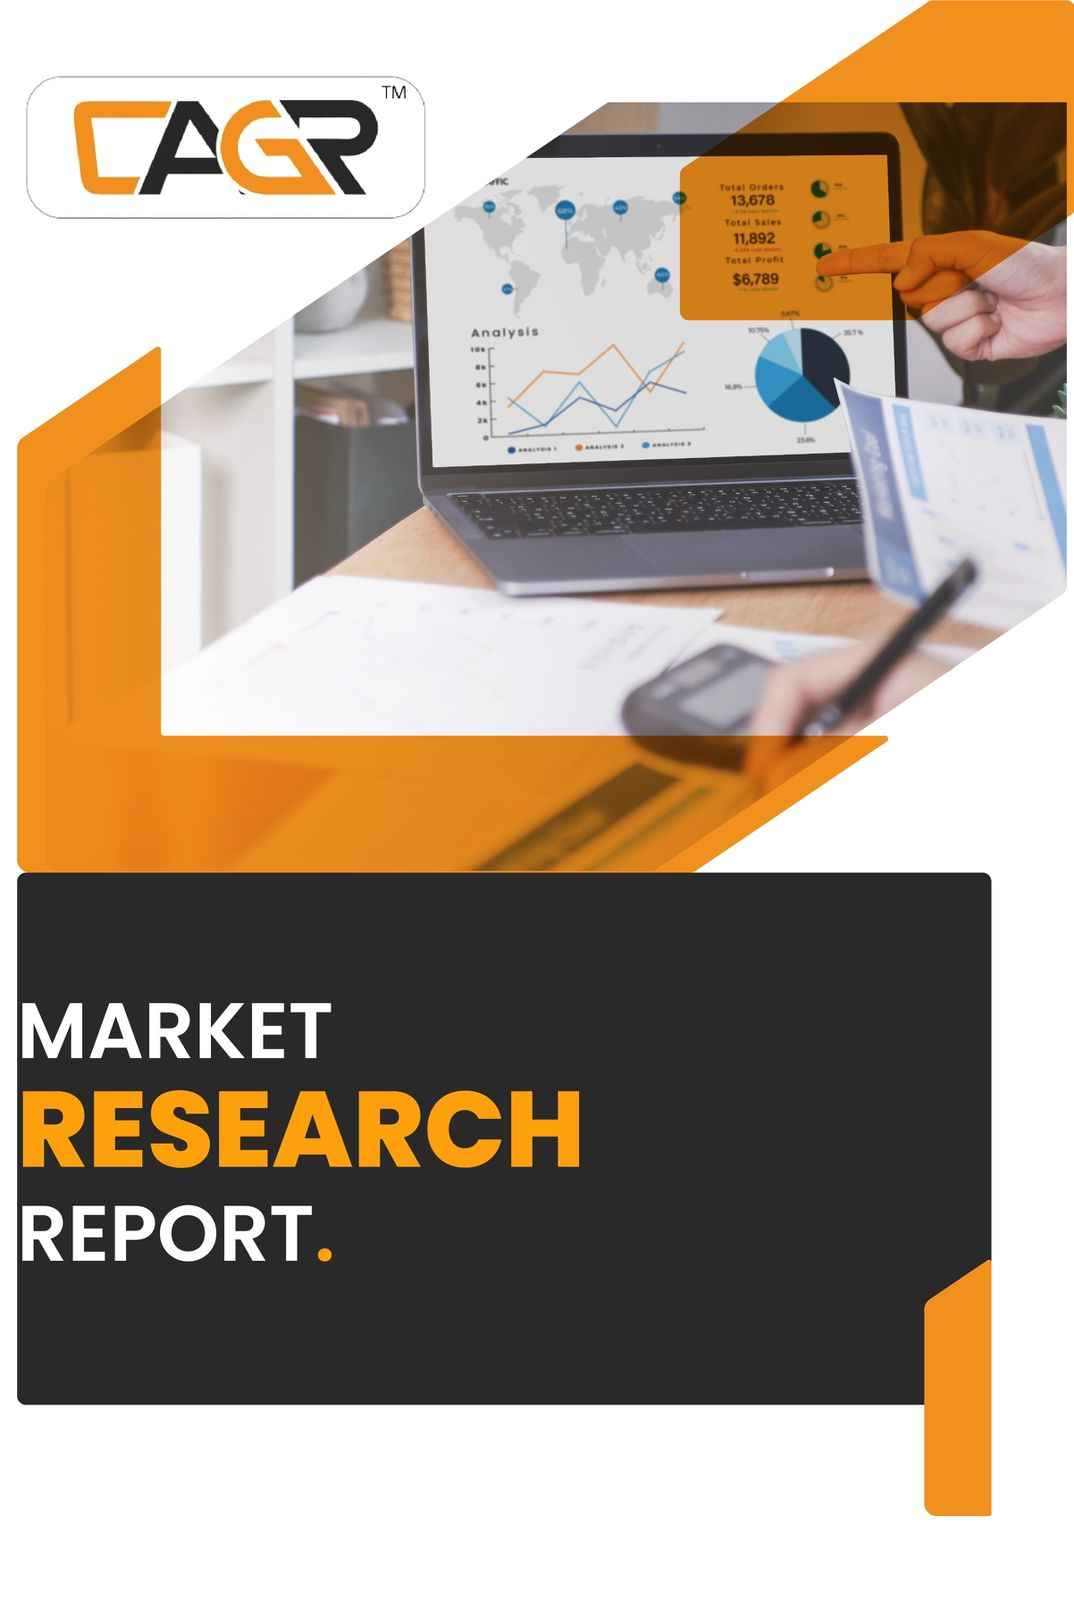 Global Aerospace Industry Assembly Machines Market Status, Trends and COVID-19 Impact Report 2022